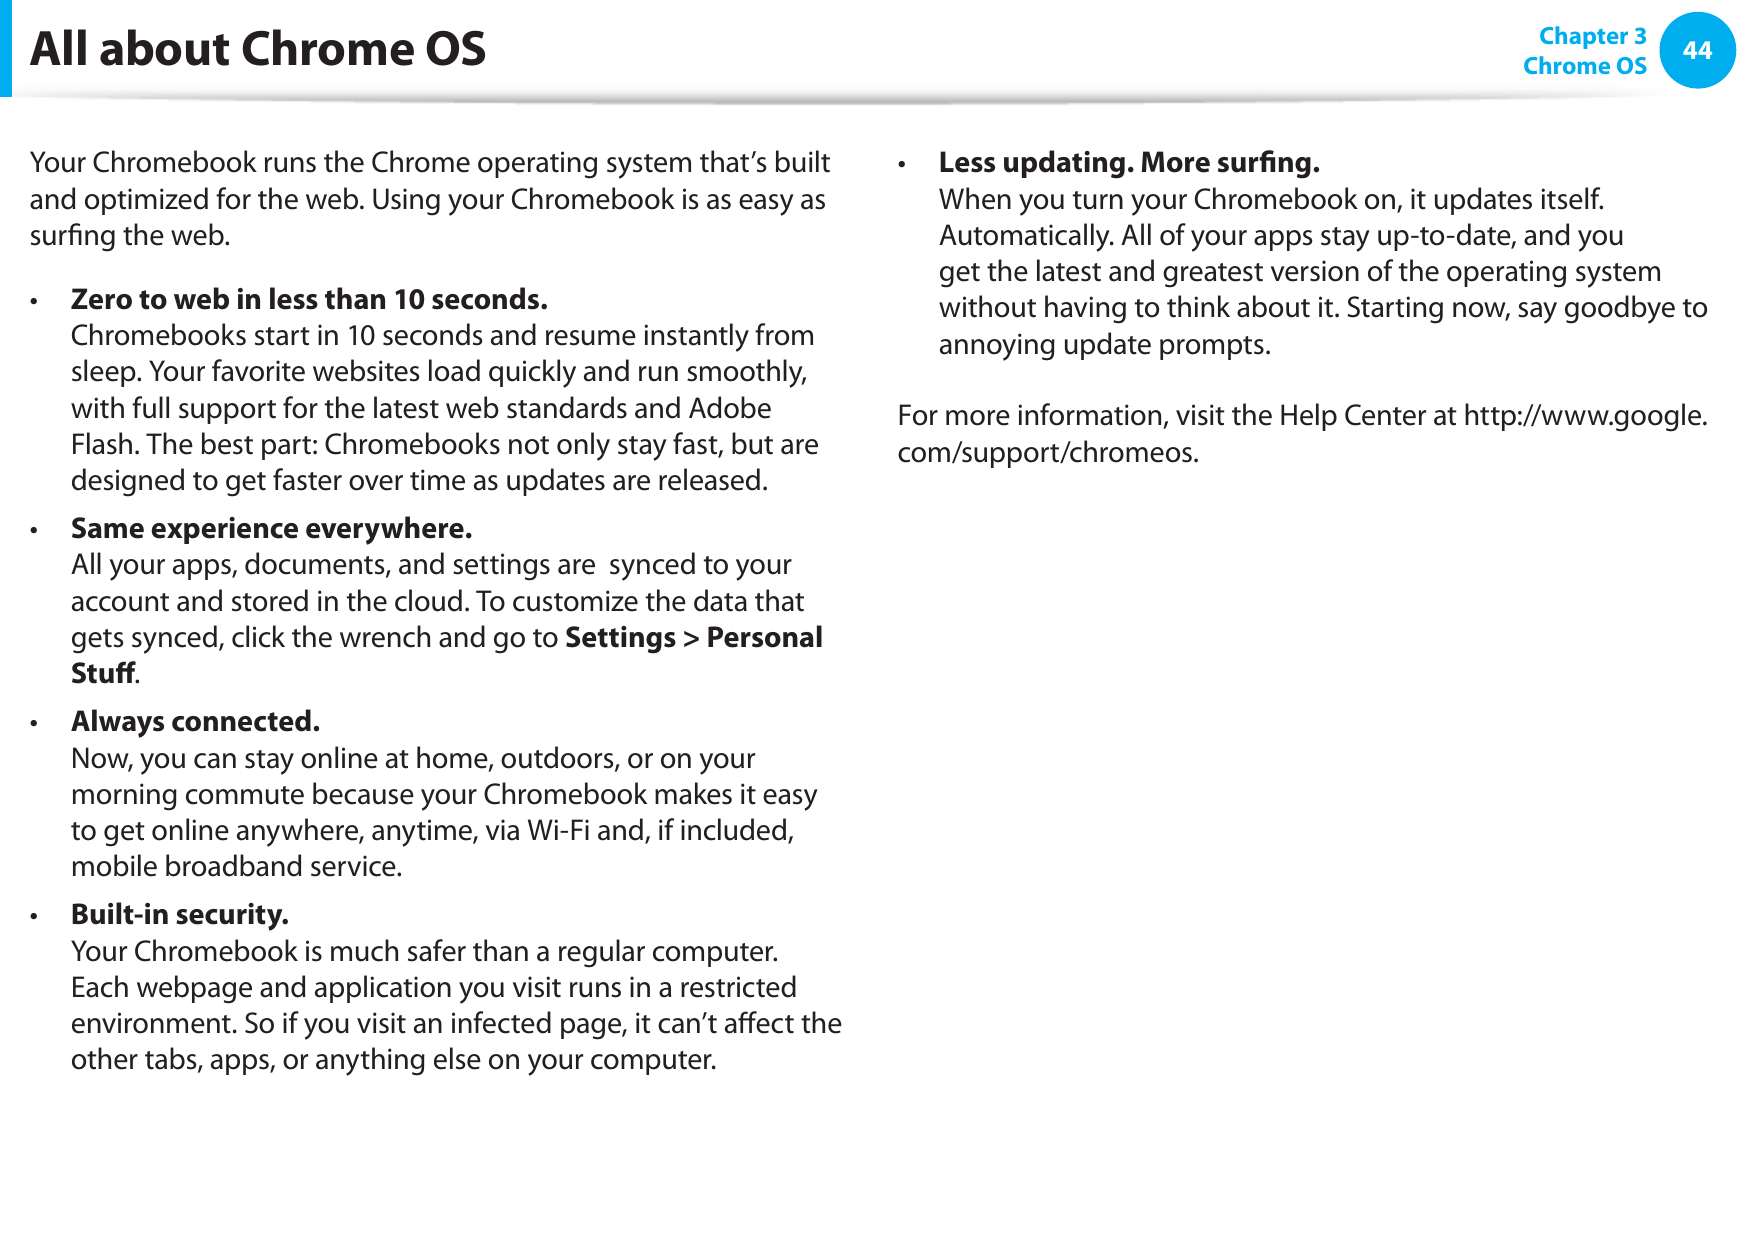 44Chapter 3 Chrome OSAll about Chrome OSYour Chromebook runs the Chrome operating system that’s built and optimized for the web. Using your Chromebook is as easy as surng the web.  Zero to web in less than 10 seconds. • Chromebooks start in 10 seconds and resume instantly from sleep. Your favorite websites load quickly and run smoothly, with full support for the latest web standards and Adobe Flash. The best part: Chromebooks not only stay fast, but are designed to get faster over time as updates are released.Same experience everywhere.•    All your apps, documents, and settings are  synced to your account and stored in the cloud. To customize the data that gets synced, click the wrench and go to Settings &gt; Personal Stu.  Always connected.•   Now, you can stay online at home, outdoors, or on your morning commute because your Chromebook makes it easy to get online anywhere, anytime, via Wi-Fi and, if included, mobile broadband service.Built-in security.•   Your Chromebook is much safer than a regular computer. Each webpage and application you visit runs in a restricted environment. So if you visit an infected page, it can’t aect the other tabs, apps, or anything else on your computer.  Less updating. More surng.•   When you turn your Chromebook on, it updates itself. Automatically. All of your apps stay up-to-date, and you get the latest and greatest version of the operating system without having to think about it. Starting now, say goodbye to annoying update prompts.For more information, visit the Help Center at http://www.google.com/support/chromeos. 